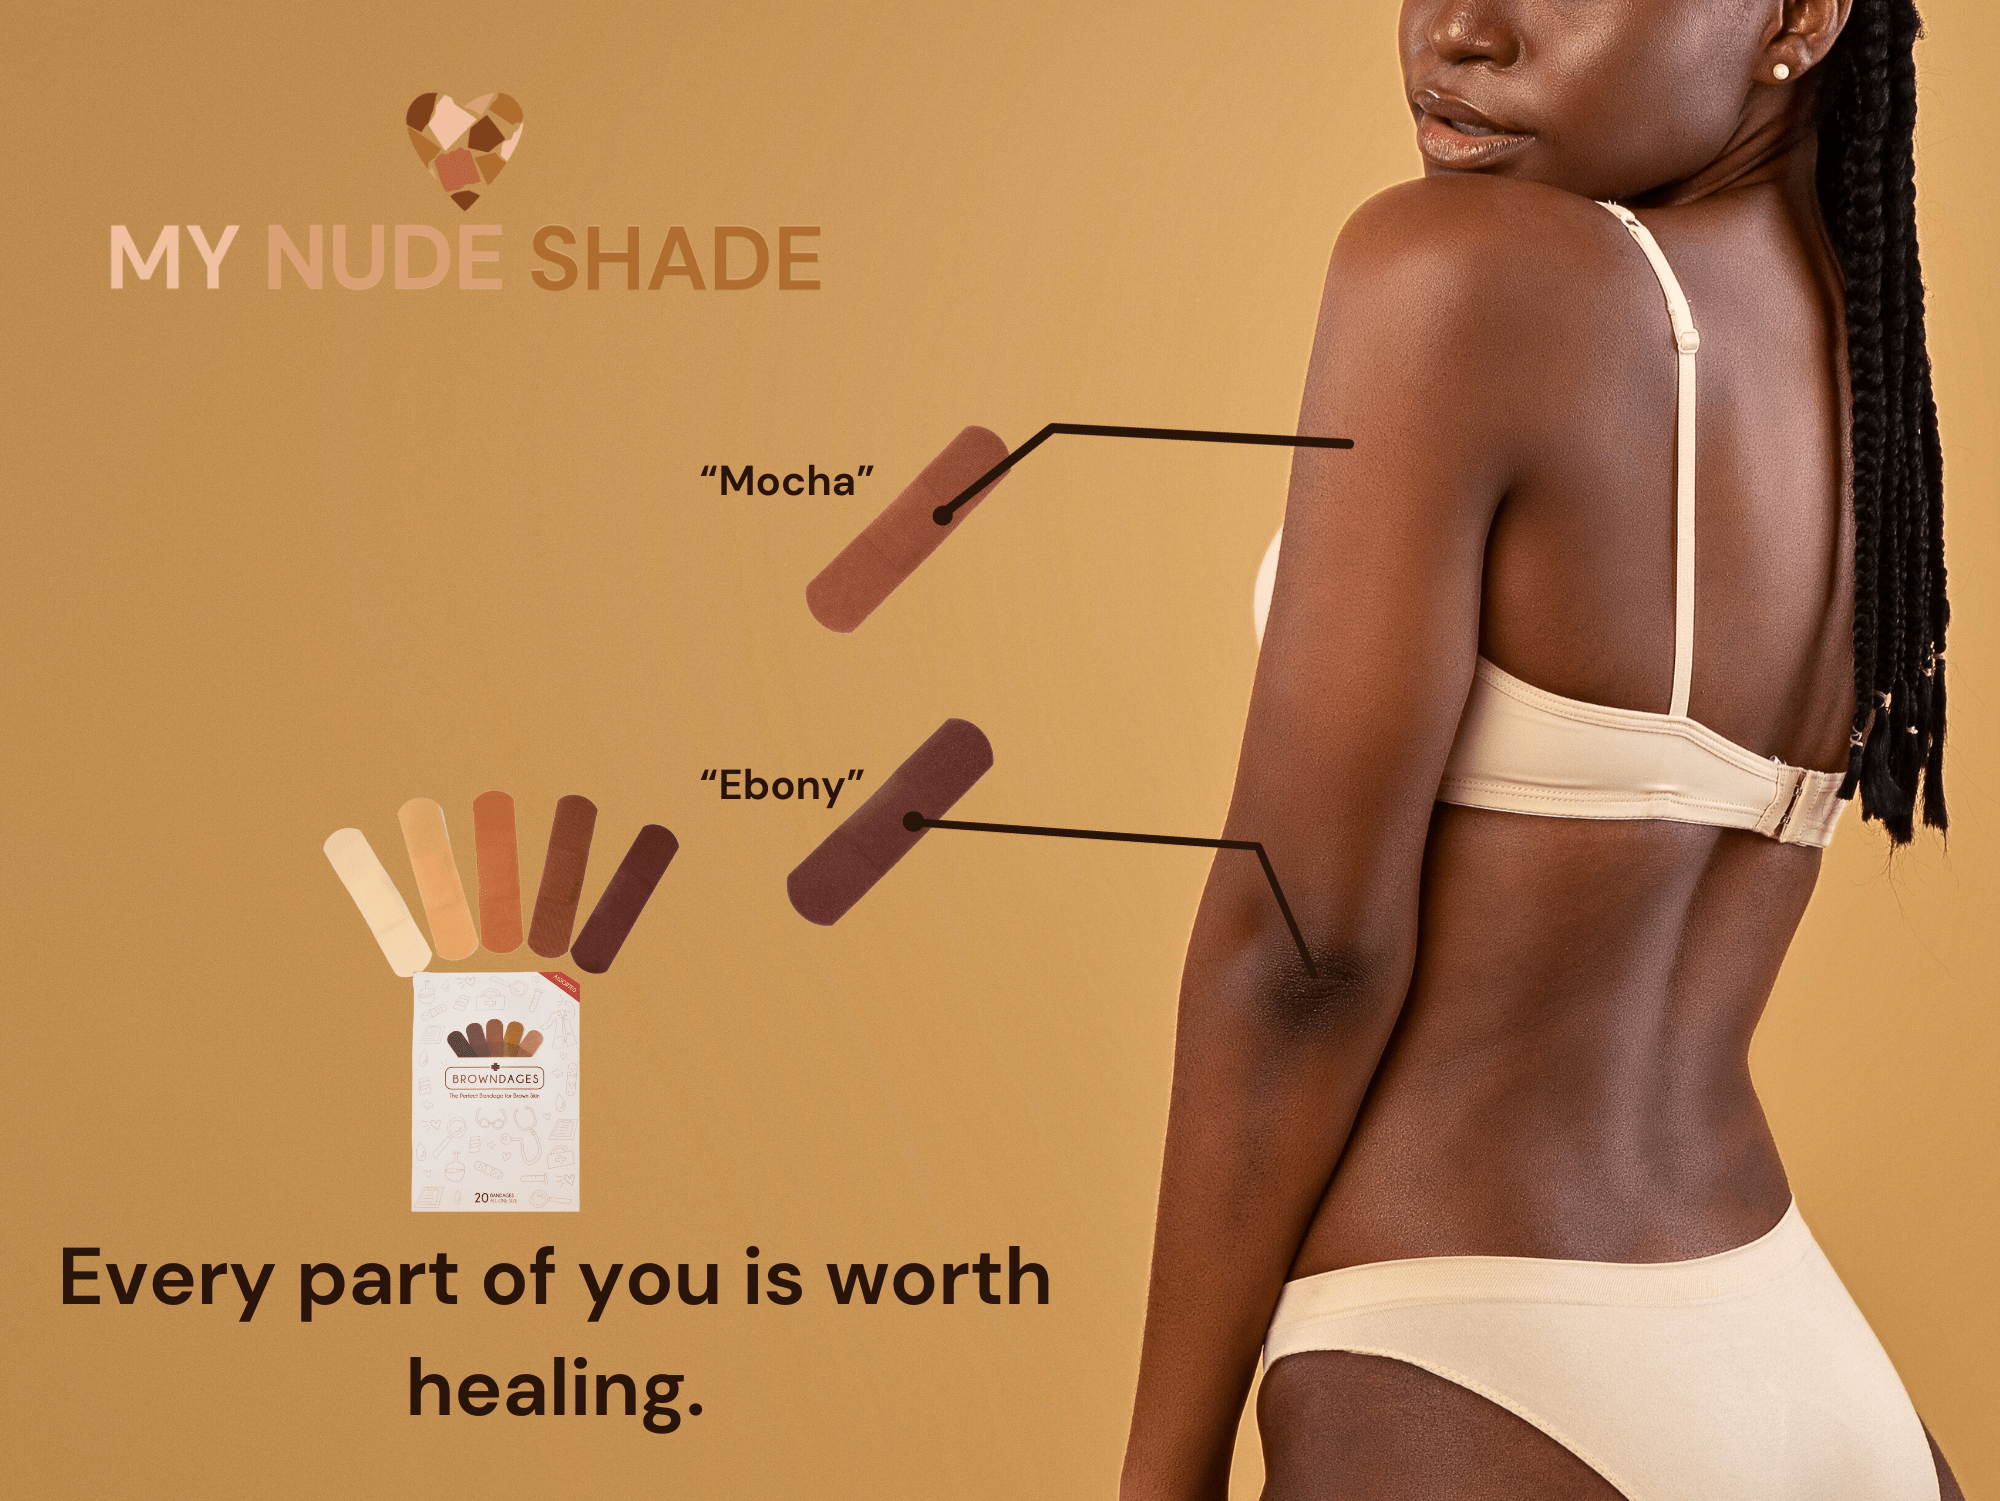 A display ad showing assorted skin tone Band-Aids for a dark skin model posed in beige underwear with a My Nude Shade logo.